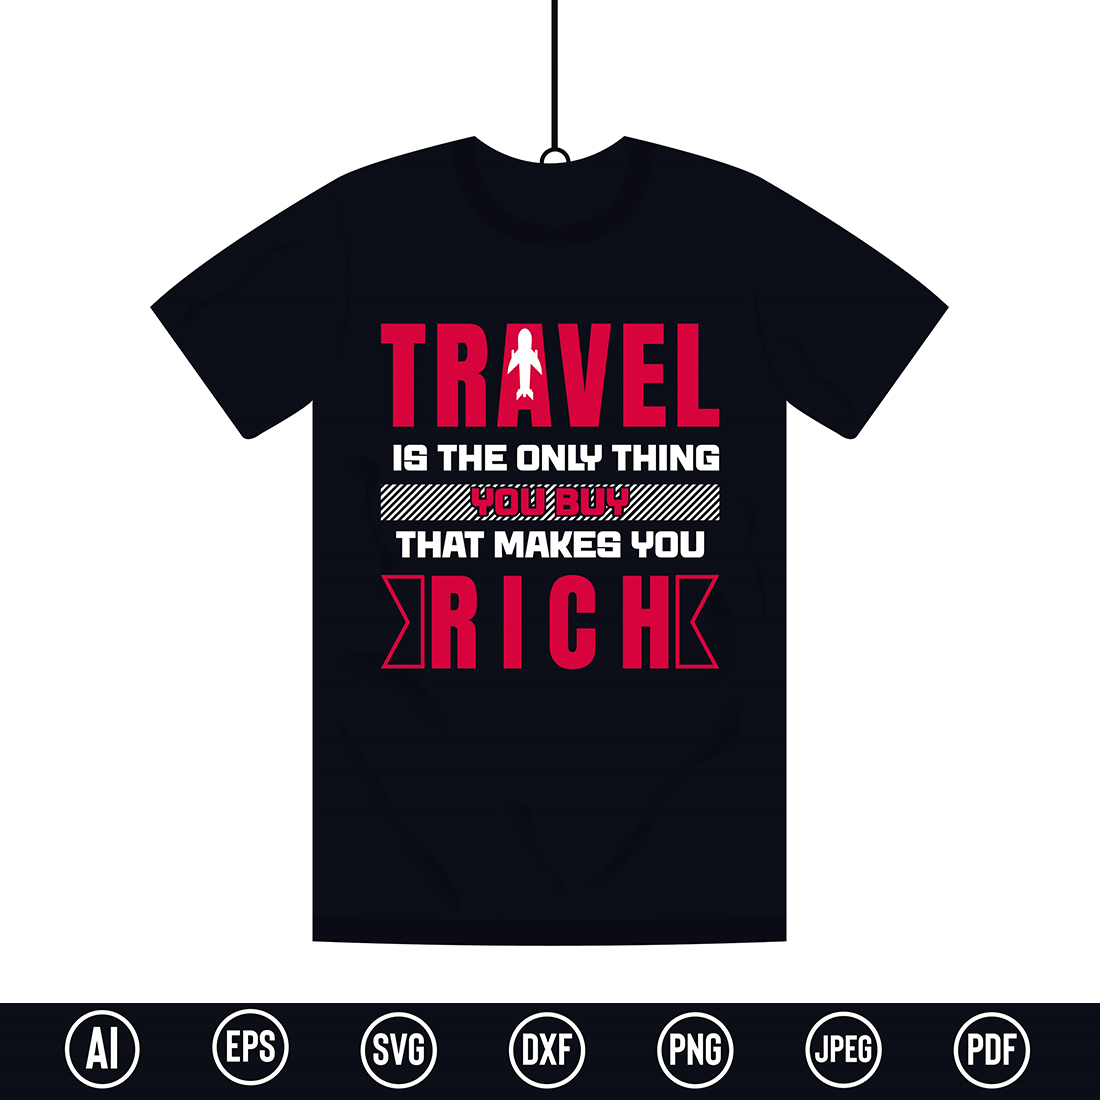 Modern Typography Travel T-Shirt design with “Travel is the only thing your buy that makes you rich” quote for t-shirt, posters, stickers, mug prints, banners, gift cards, labels etc cover image.